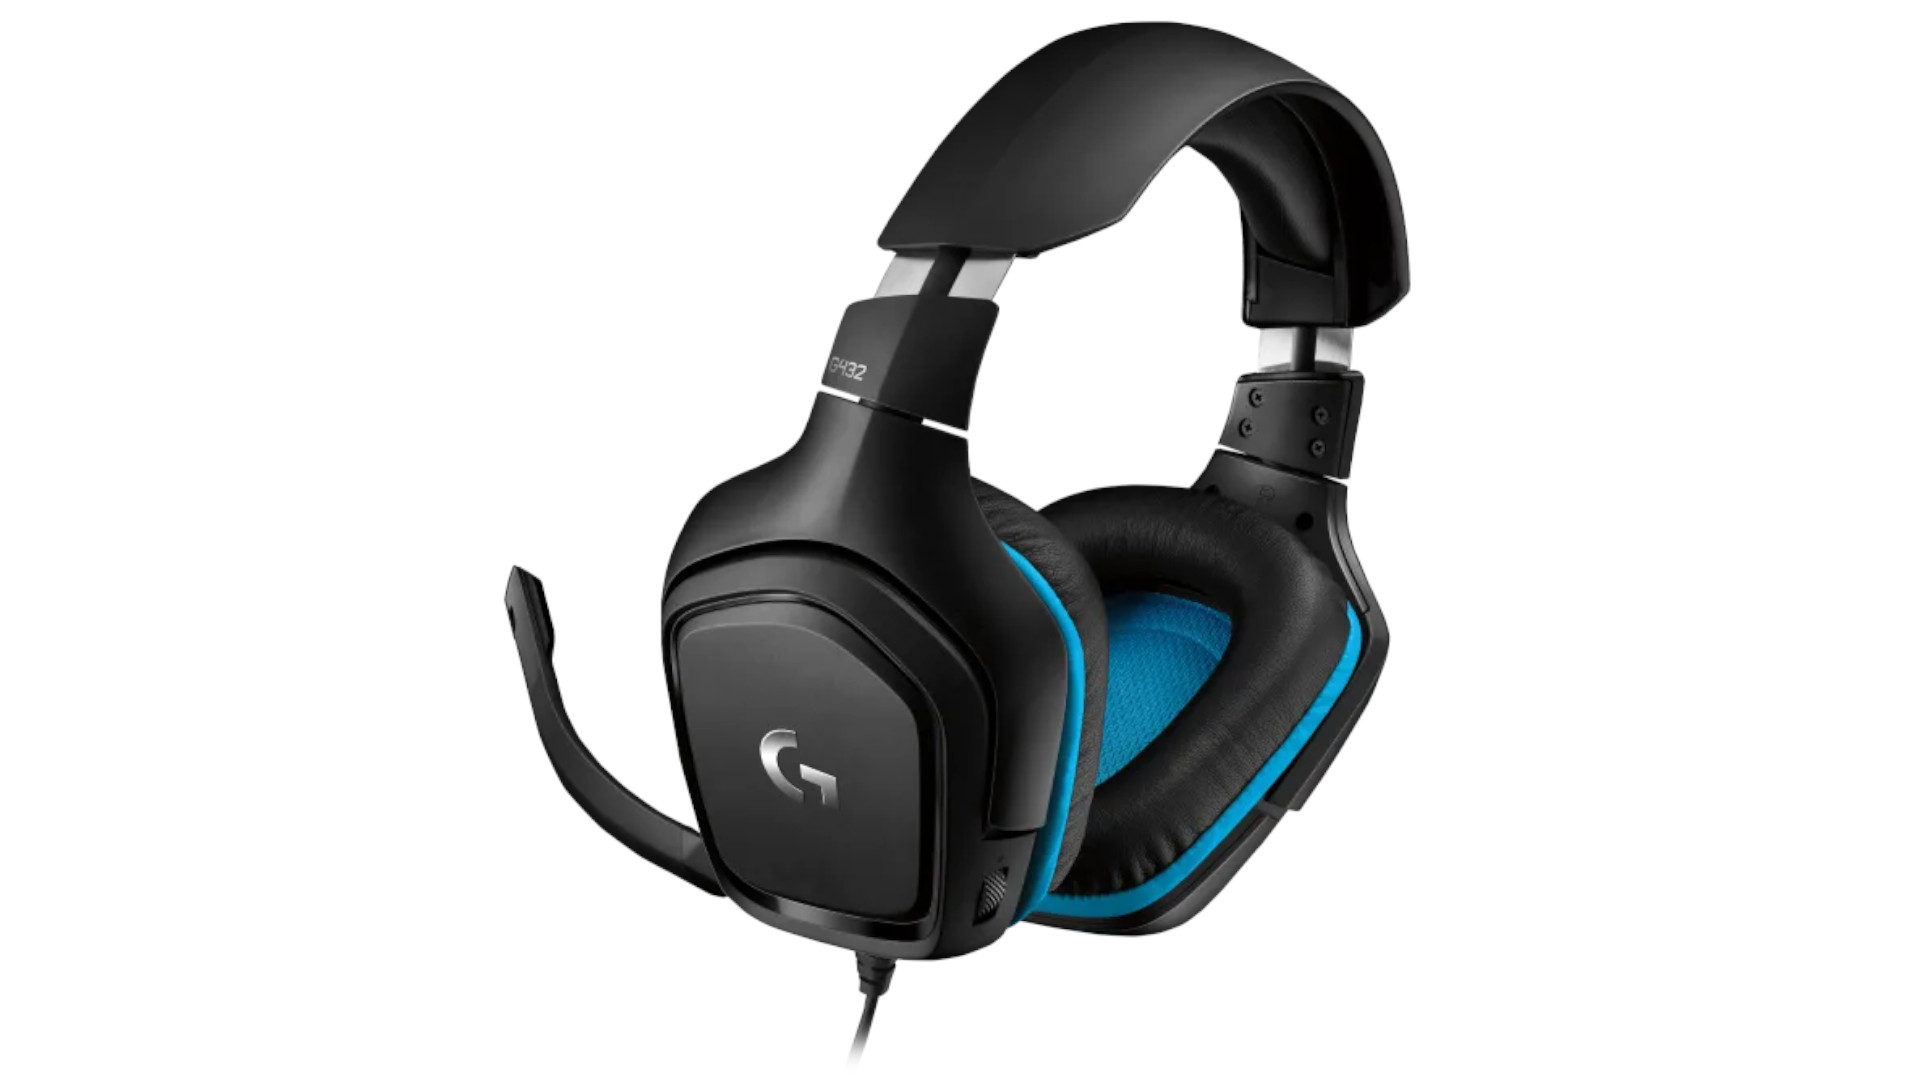 The Logitech G432 wired gaming headset can be yours with 50% off at Amazon